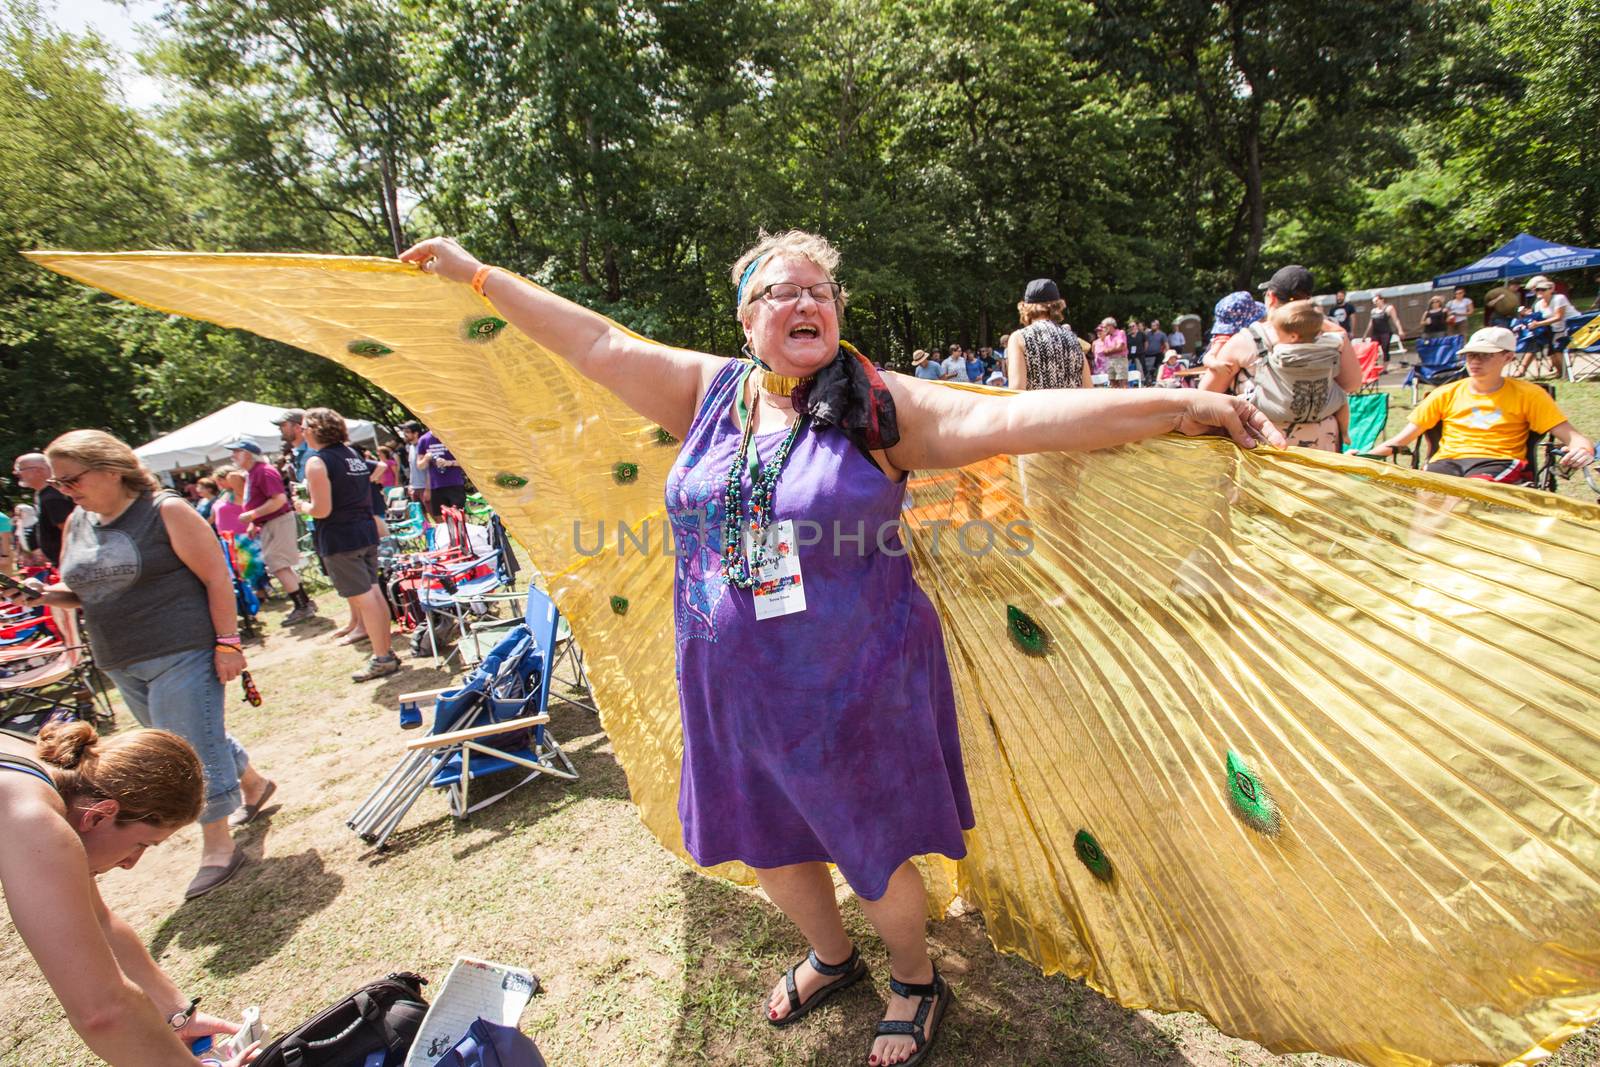 HOT SPRINGS, NC - JULY 10: Happy mature woman in purple dress flying with angel wings at the Wild Goose Festival on July 10, 2016 in Hot Springs, NC, USA.